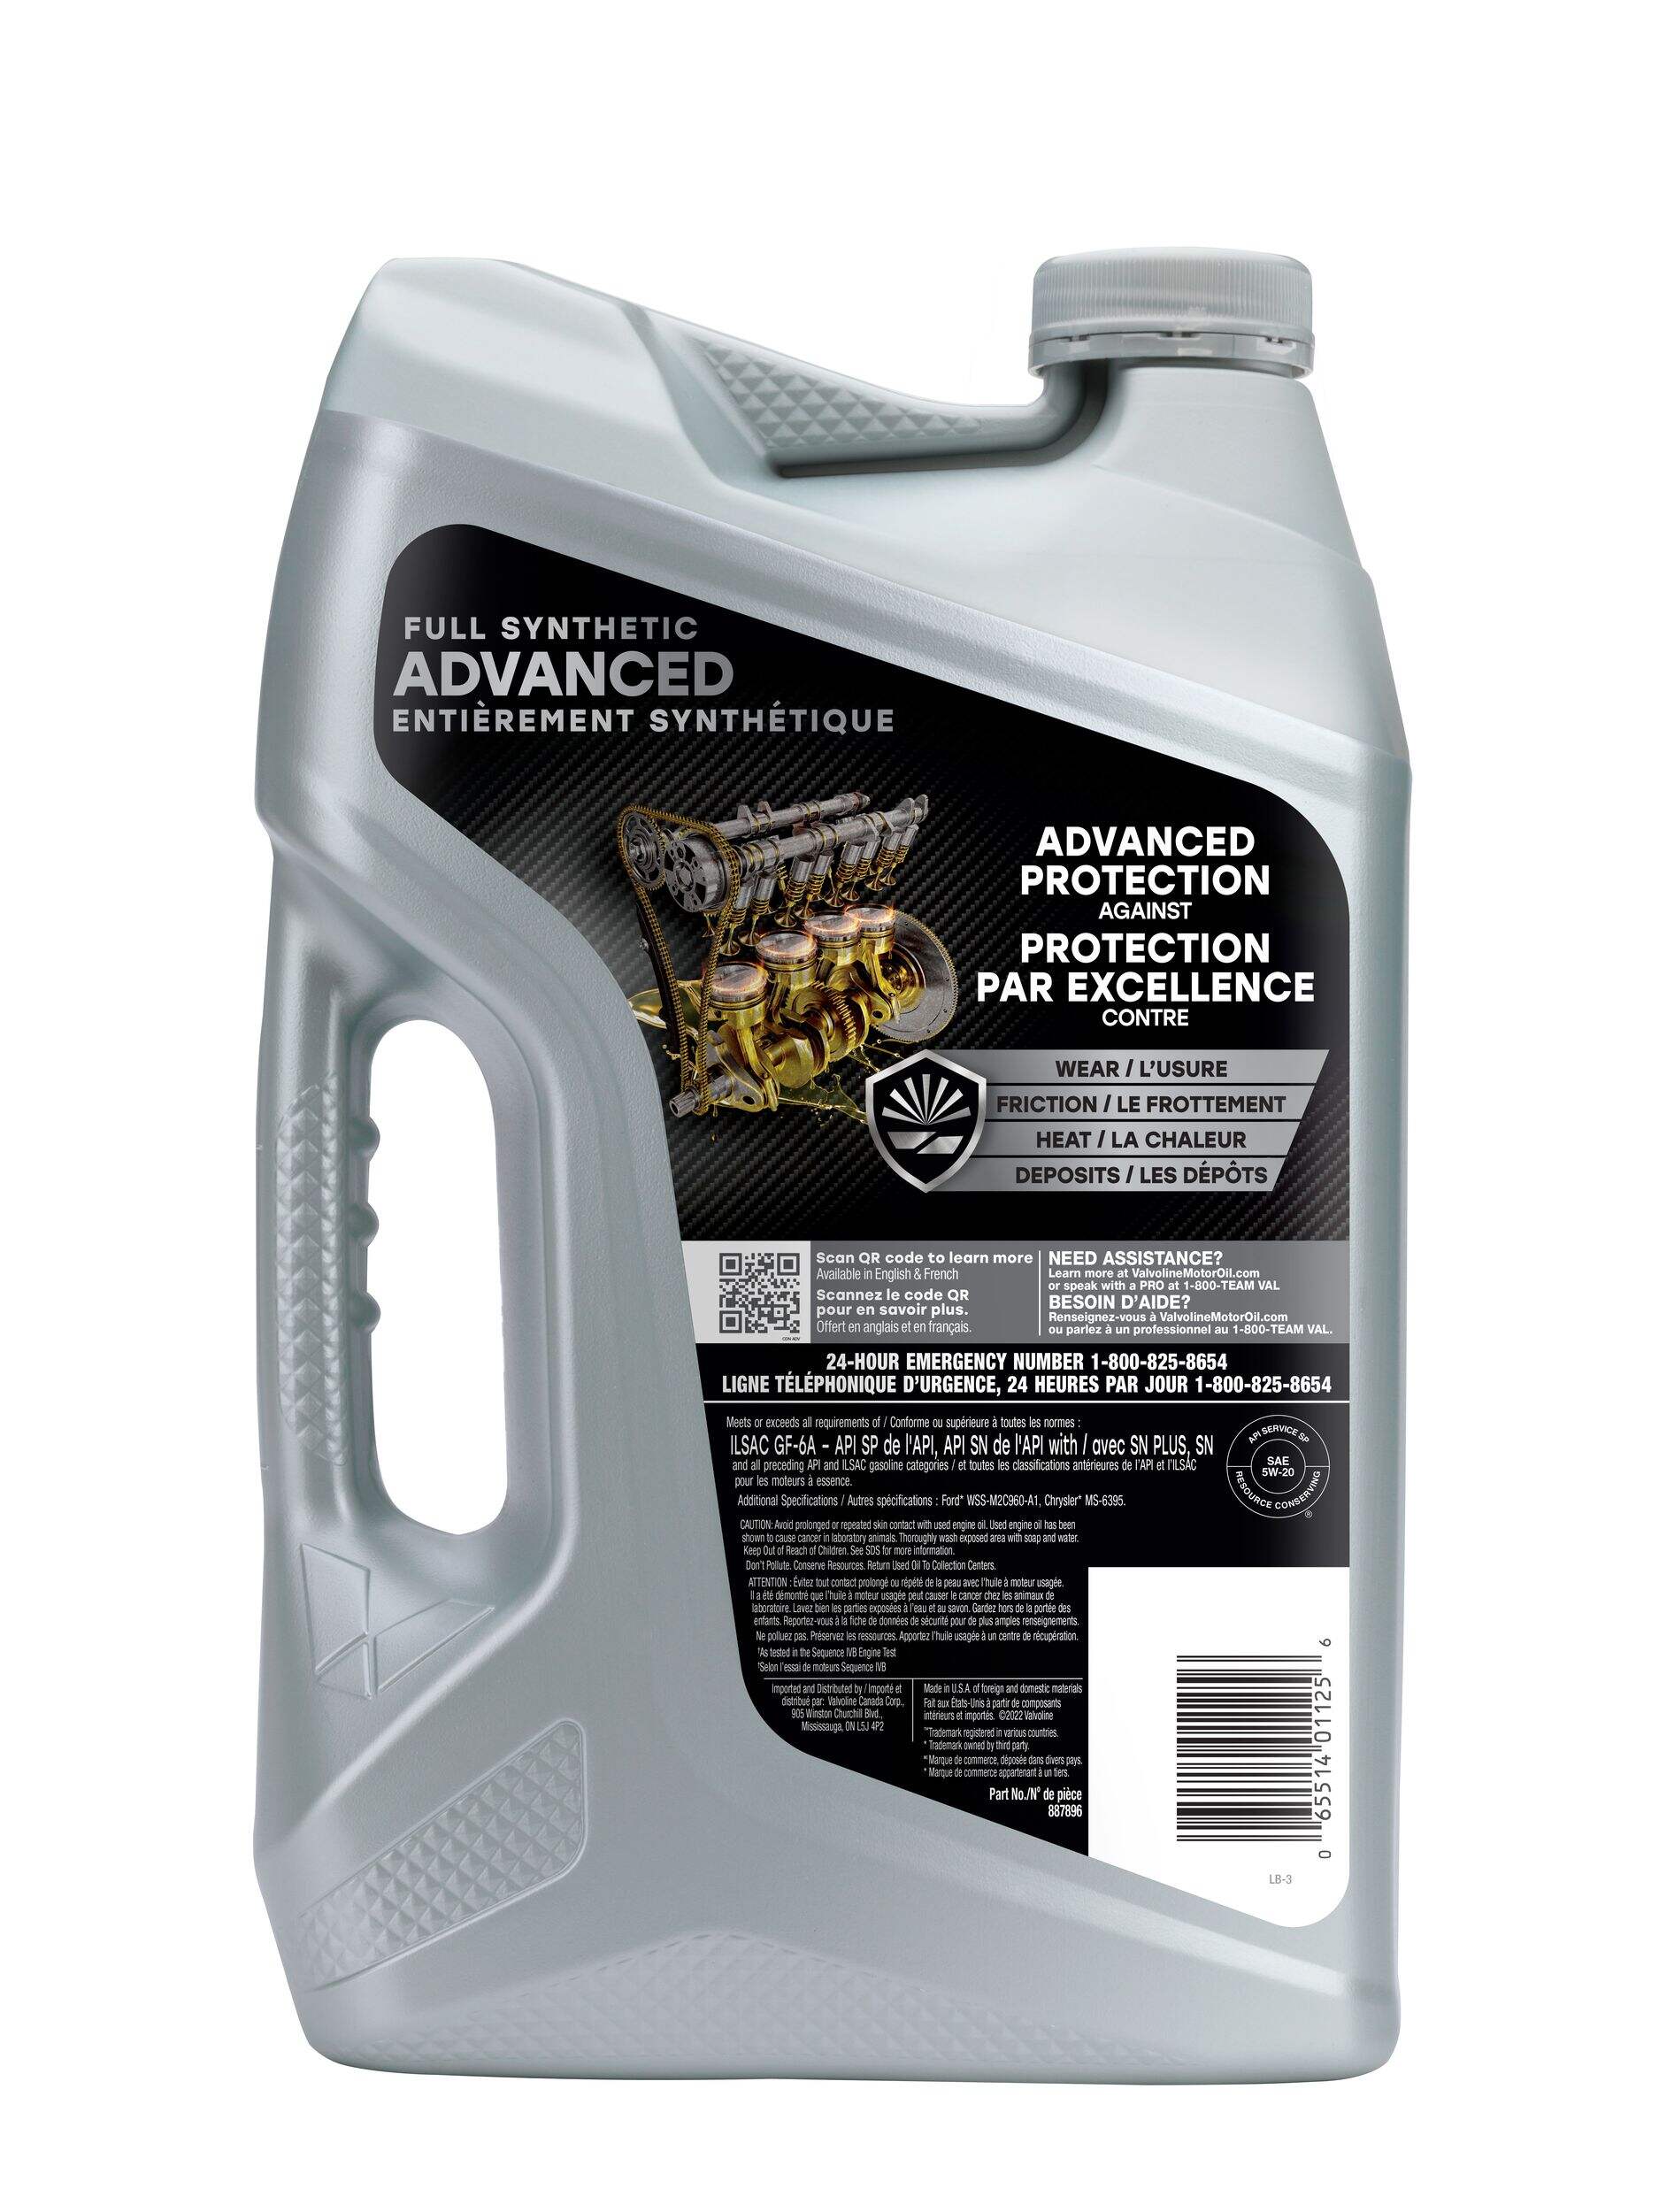 Valvoline Advanced 5W20 Full Synthetic Engine/Motor Oil, 5-L | Canadian ...